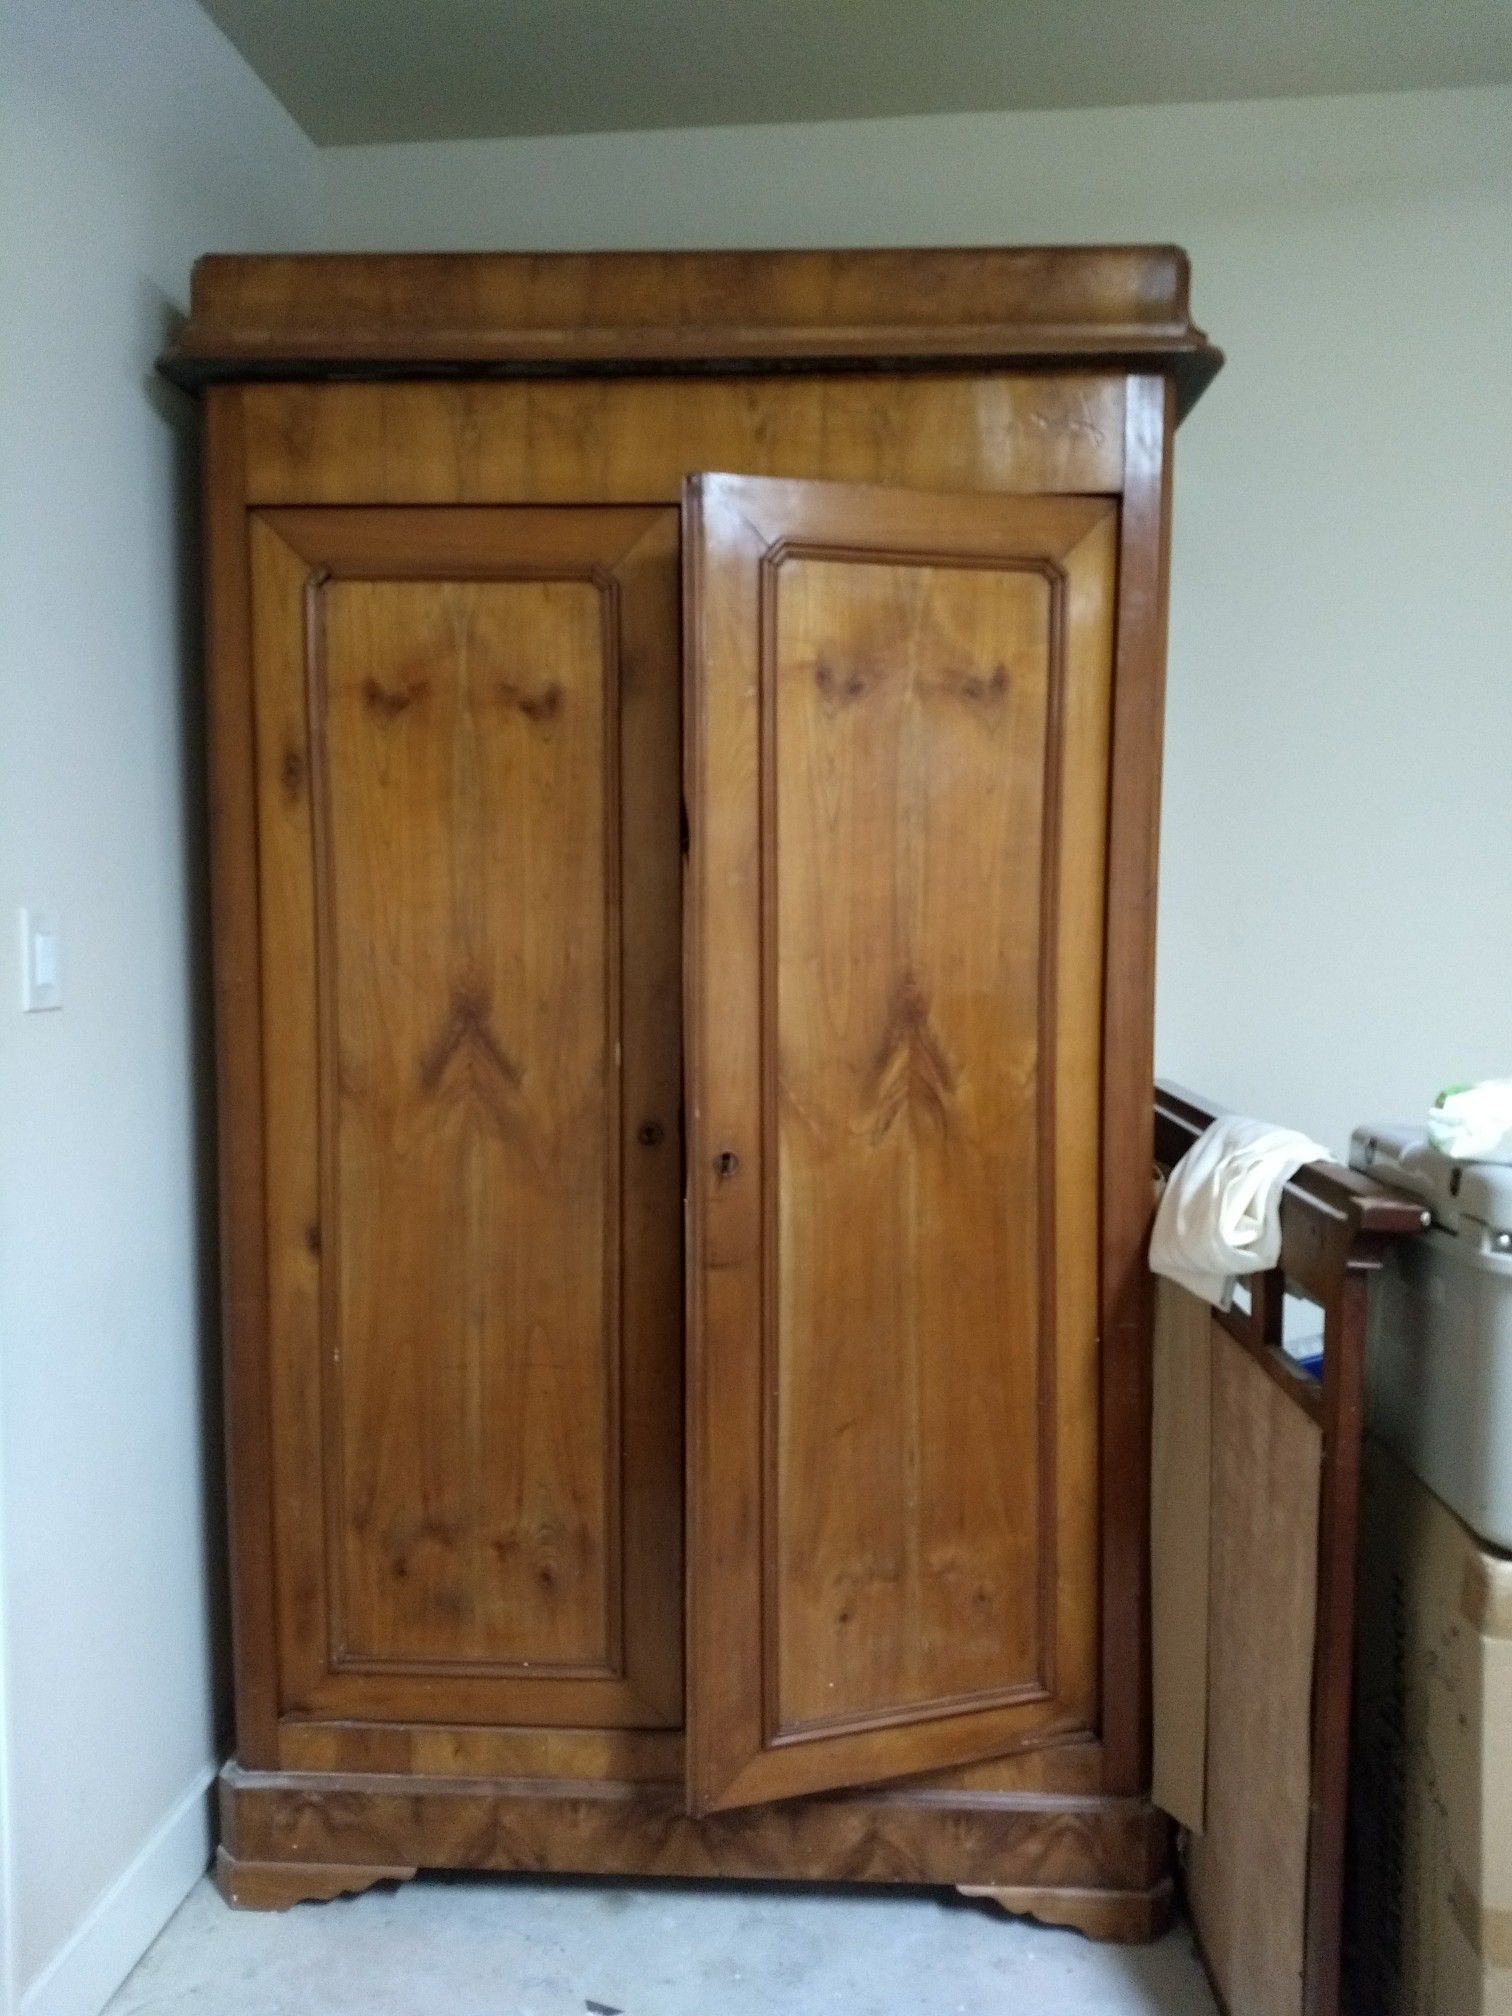 Antique French Armoire 54" x 34" x 74"